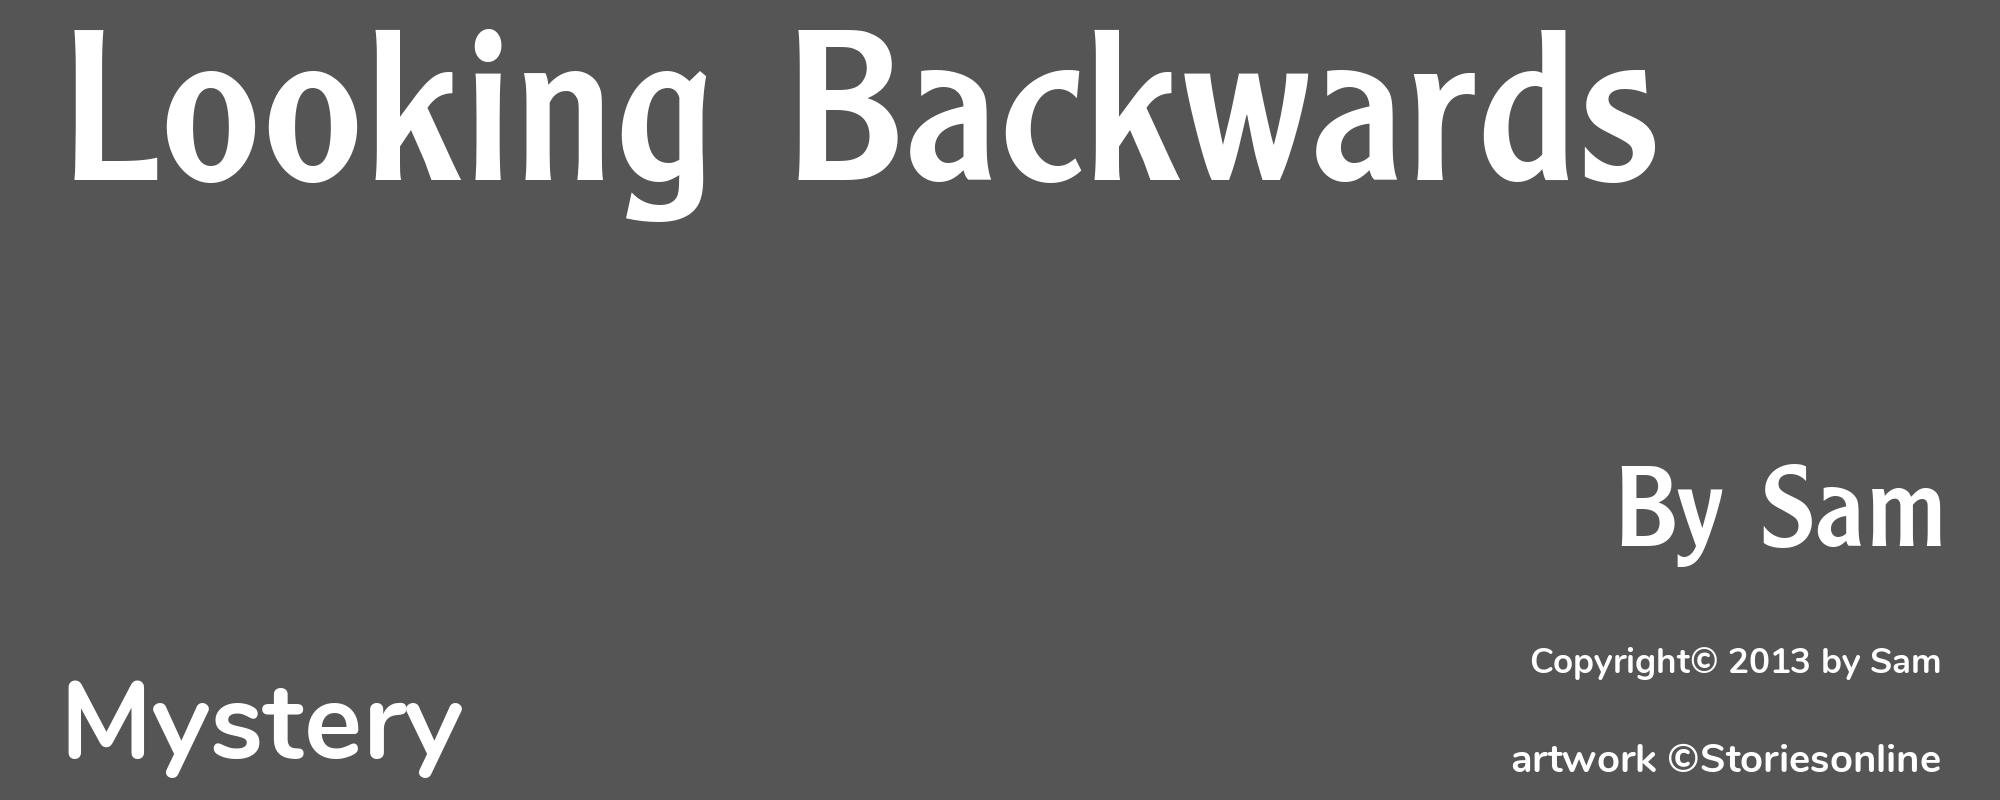 Looking Backwards - Cover